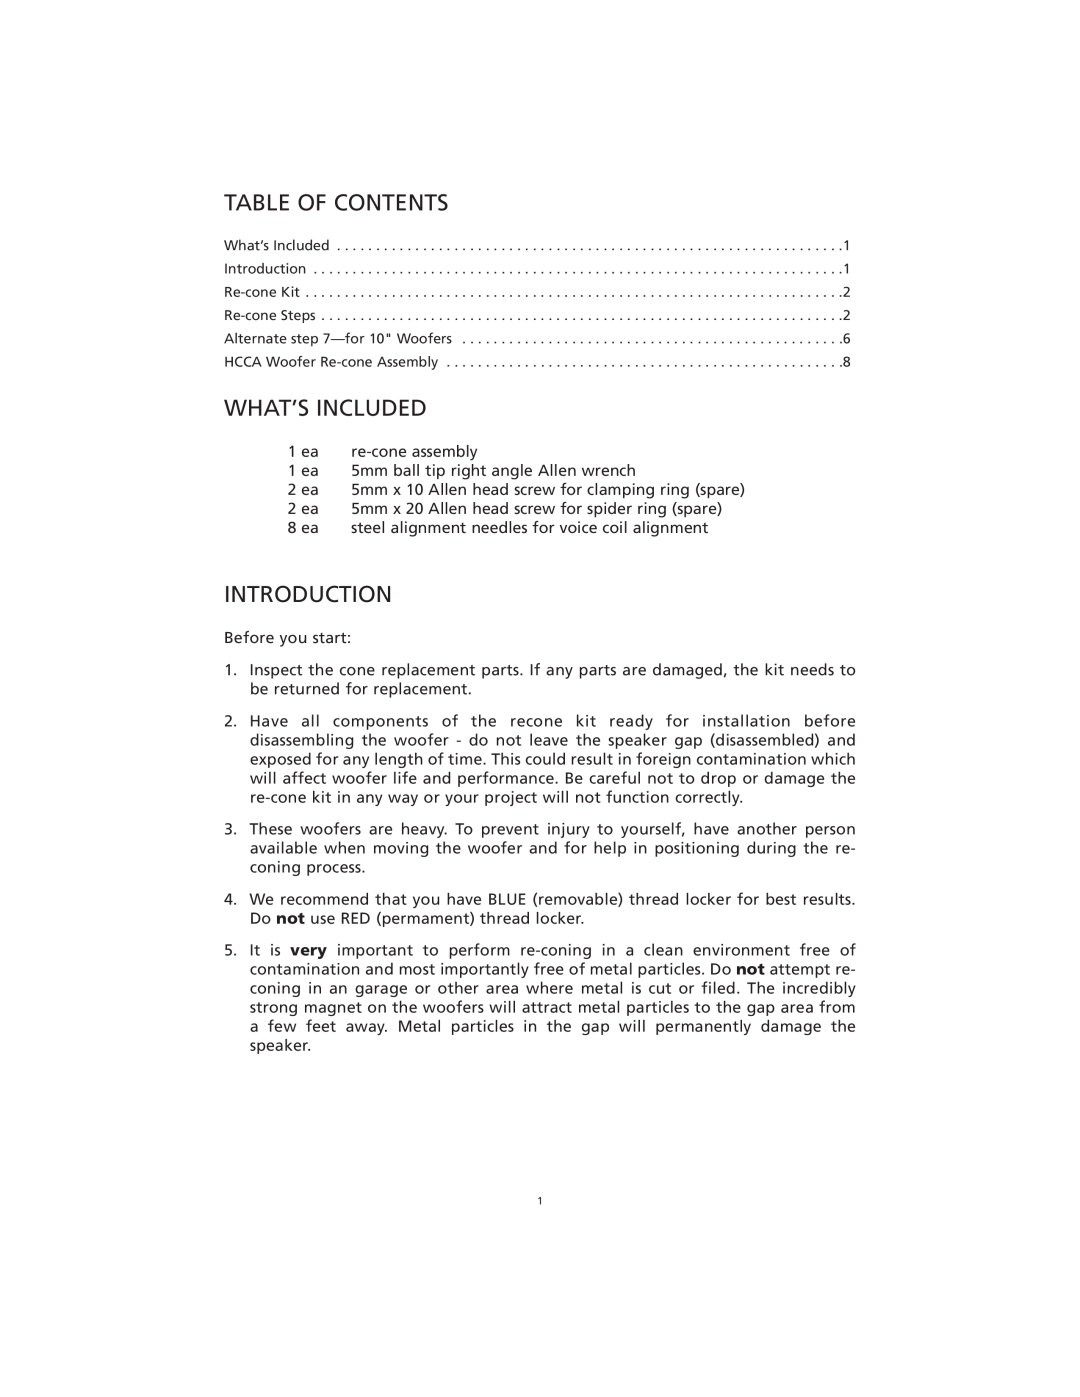 Orion G27902 manual Table Of Contents, What’S Included, Introduction 